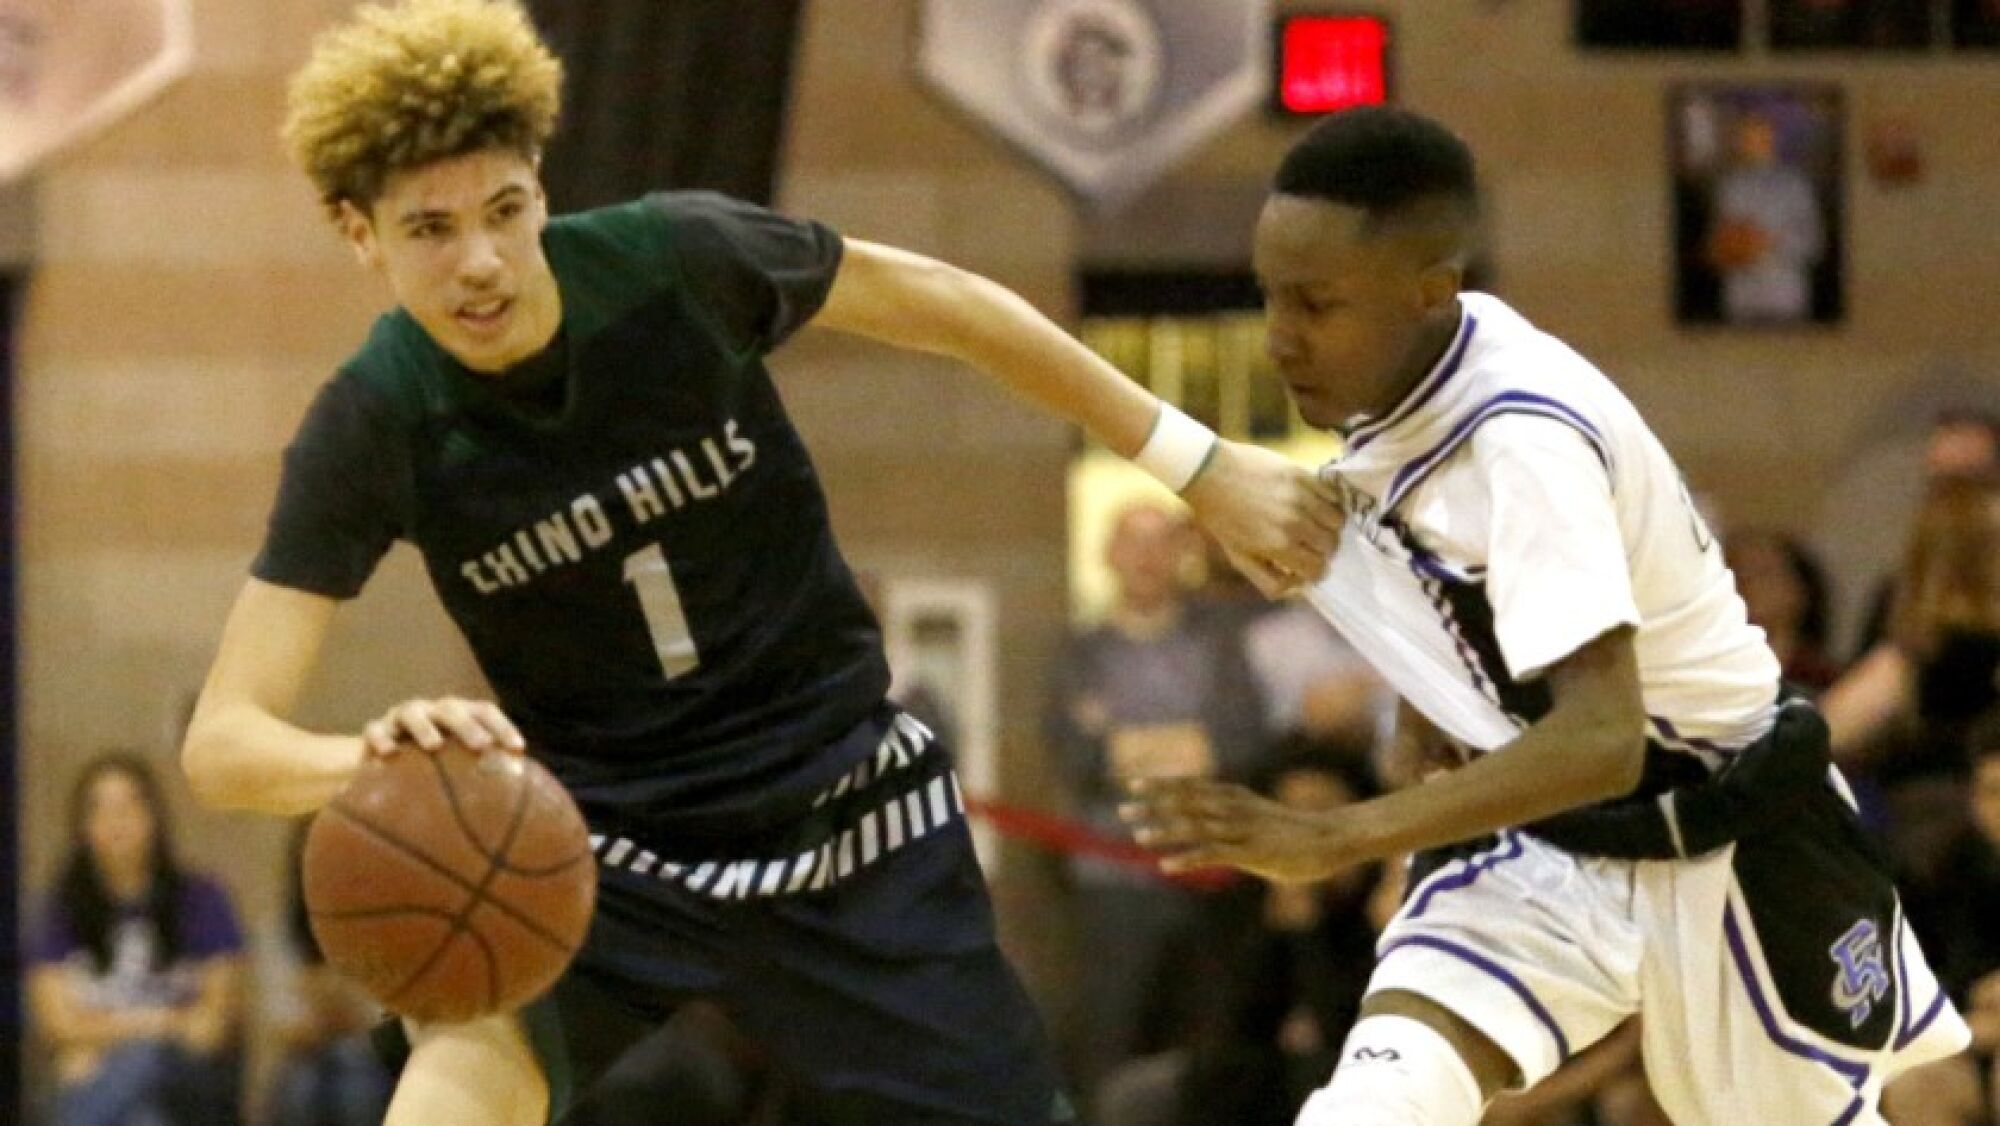 Chino Hills guard LaMelo Ball bring the ball up court against Rancho Cucamonga.